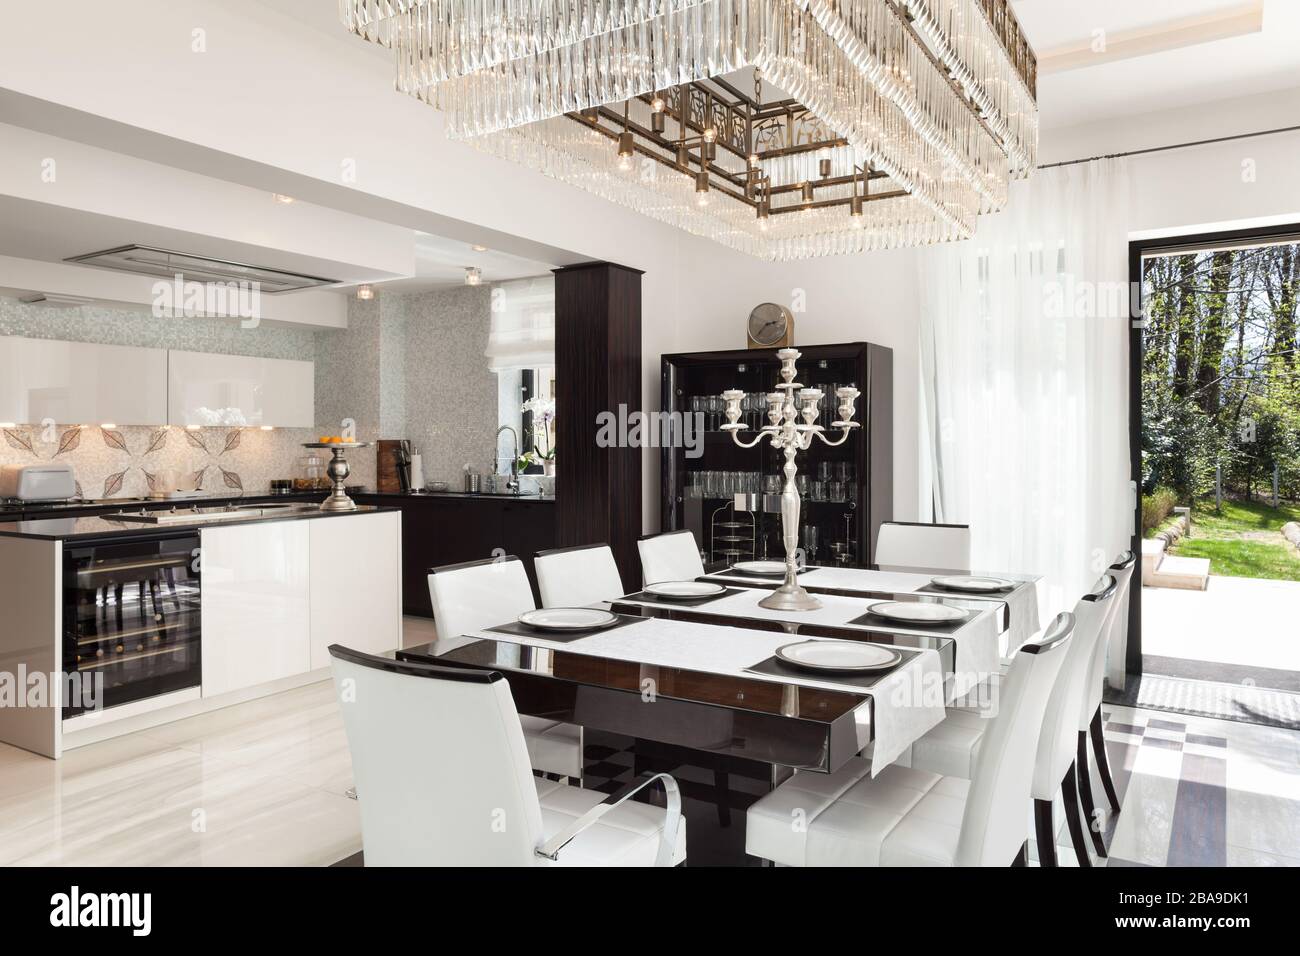 architecture, modern house, beautiful interiors, dining room Stock Photo